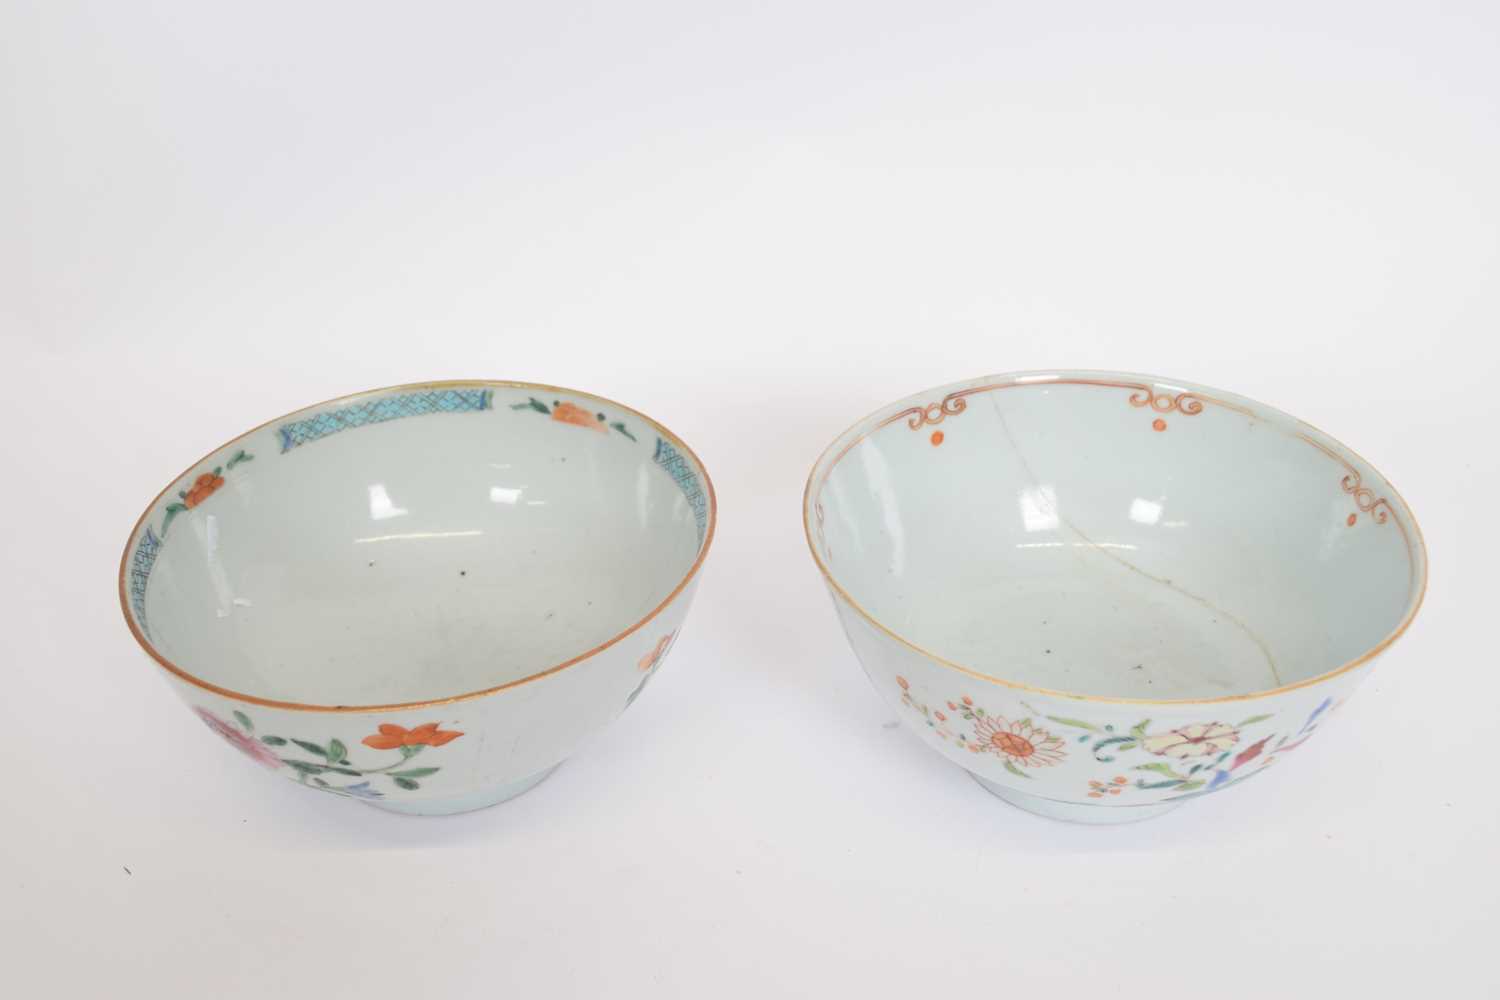 Two Qianlong period bowls with blue and white enamelled designs, mainly of flowers, some in - Bild 2 aus 3